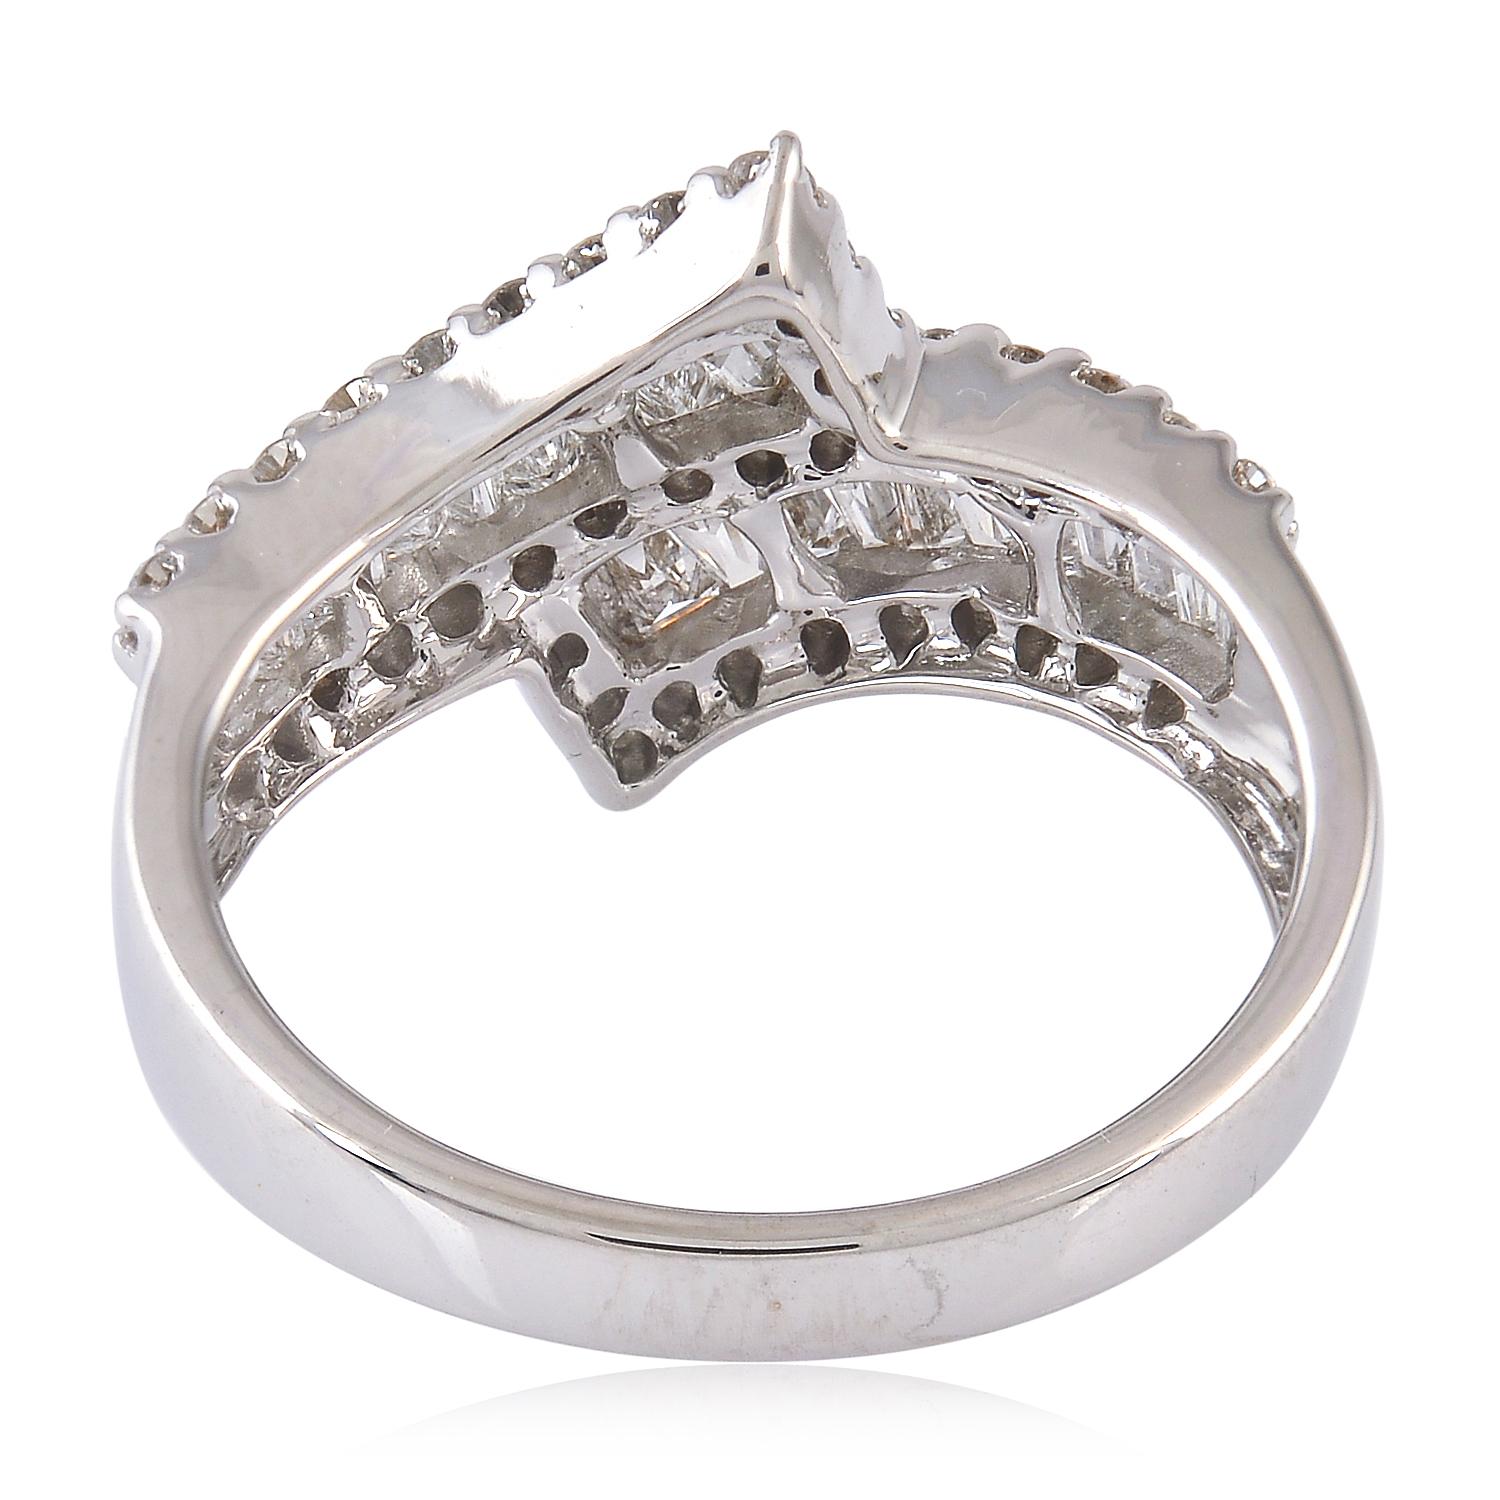 This ring has been meticulously crafted from 18-karat white gold and set in .95 carats of sparkling diamonds. 

The ring is a size 7 and may be resized to larger or smaller upon request. Please note that carat weights may slightly vary as each